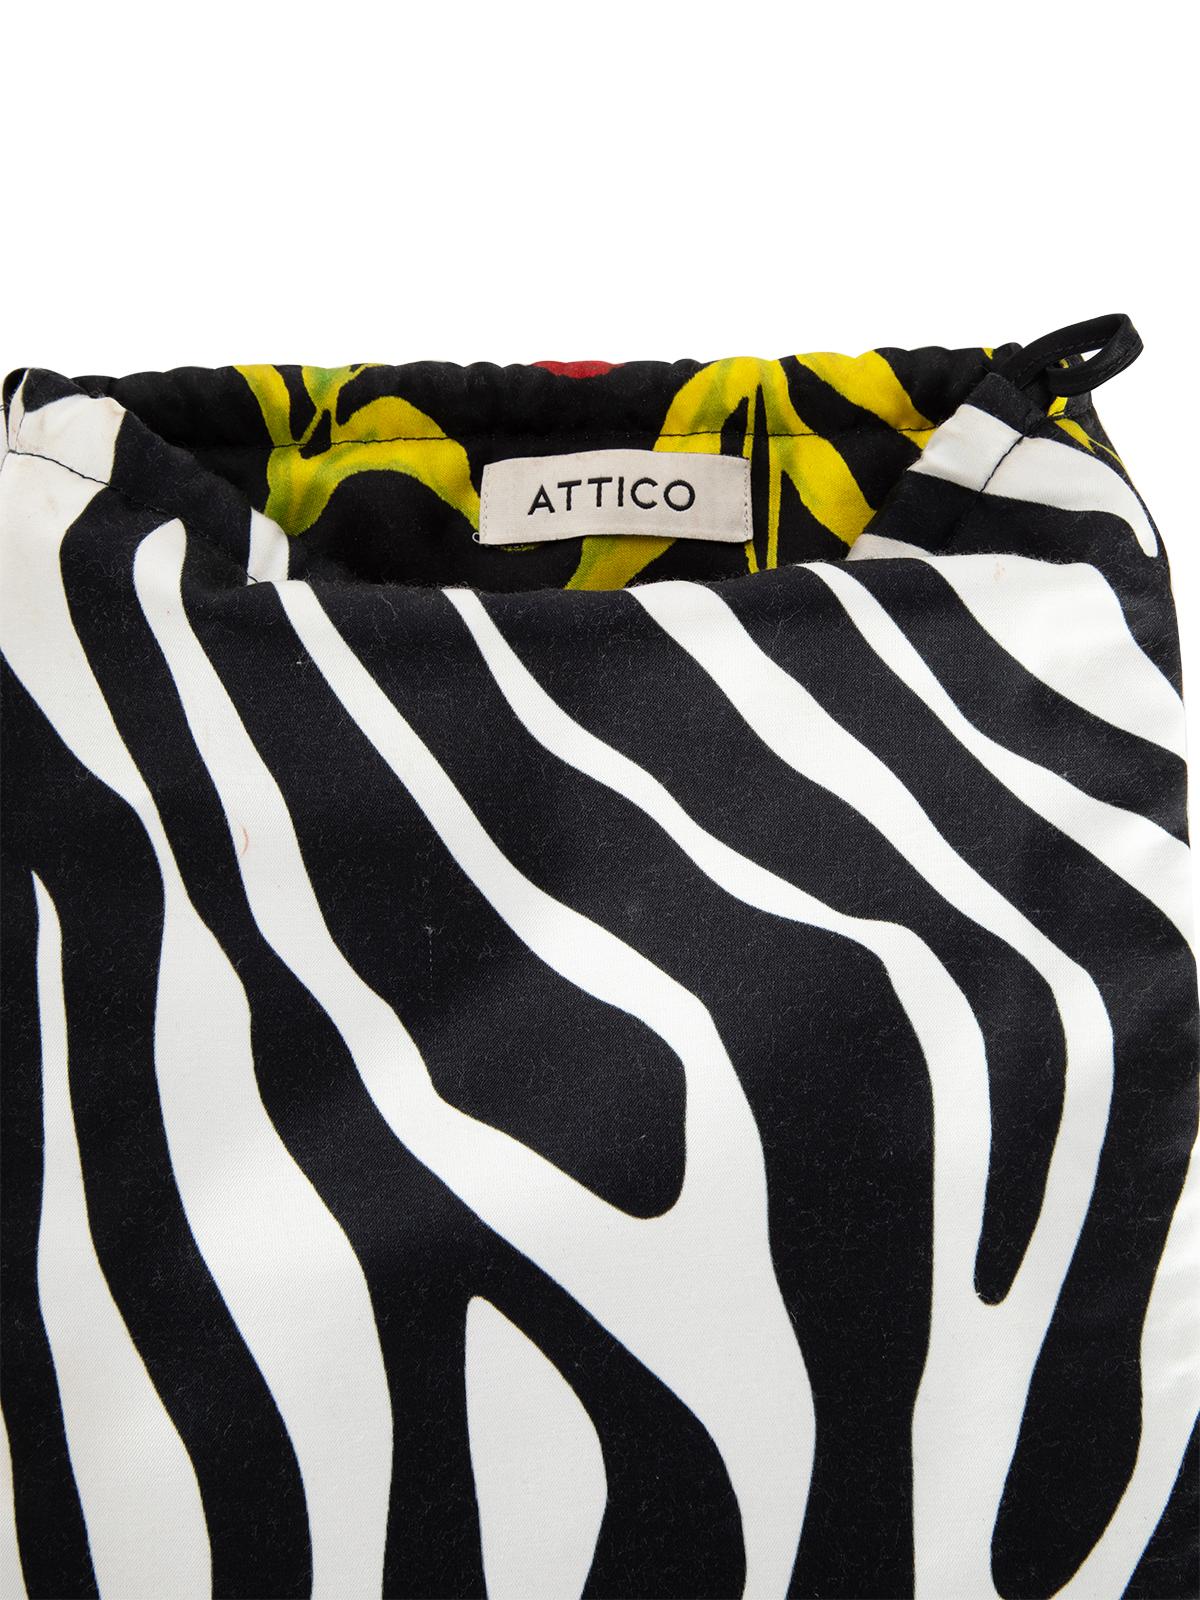 Pre-Loved Attico Women's Rose and Zebra Patterned Pouch Bag In Good Condition In London, GB